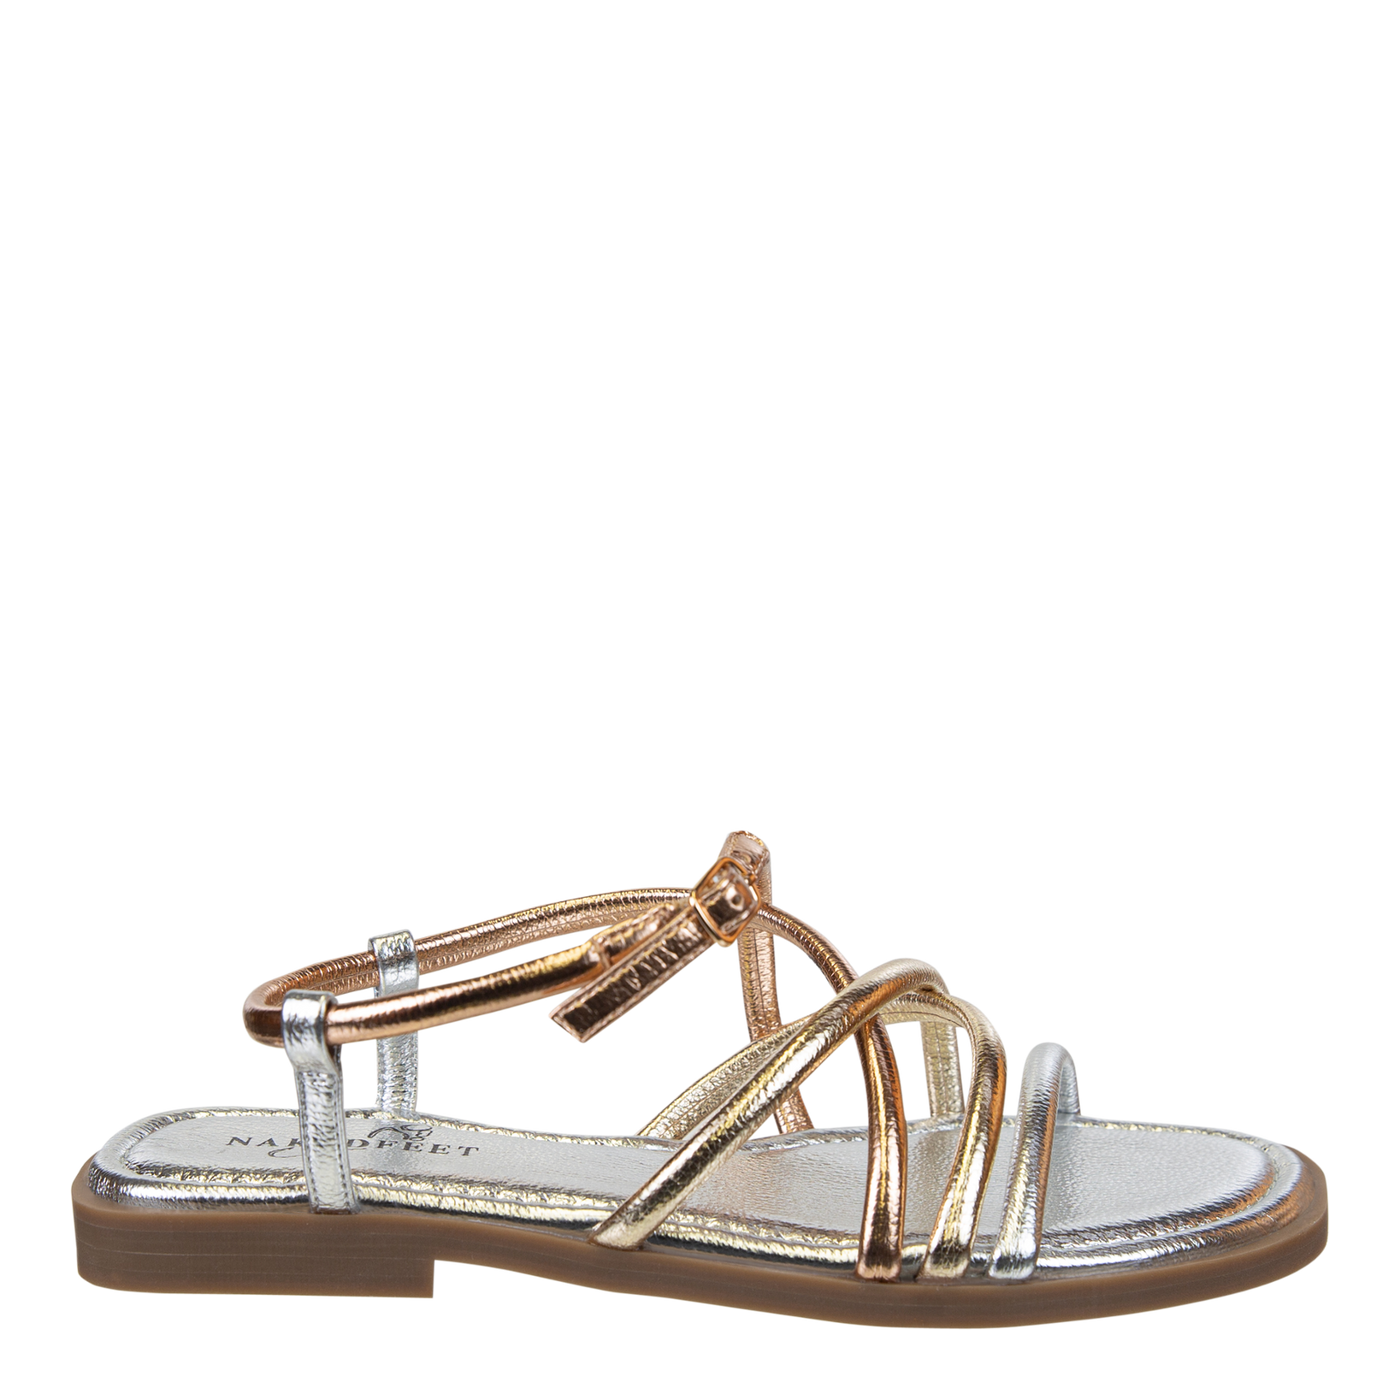 NAKED FEET - MINIMALIST in GOLD Flat Sandals-WOMEN FOOTWEAR- Corner Stone Spa and Salon Boutique in Stoughton, Wisconsin